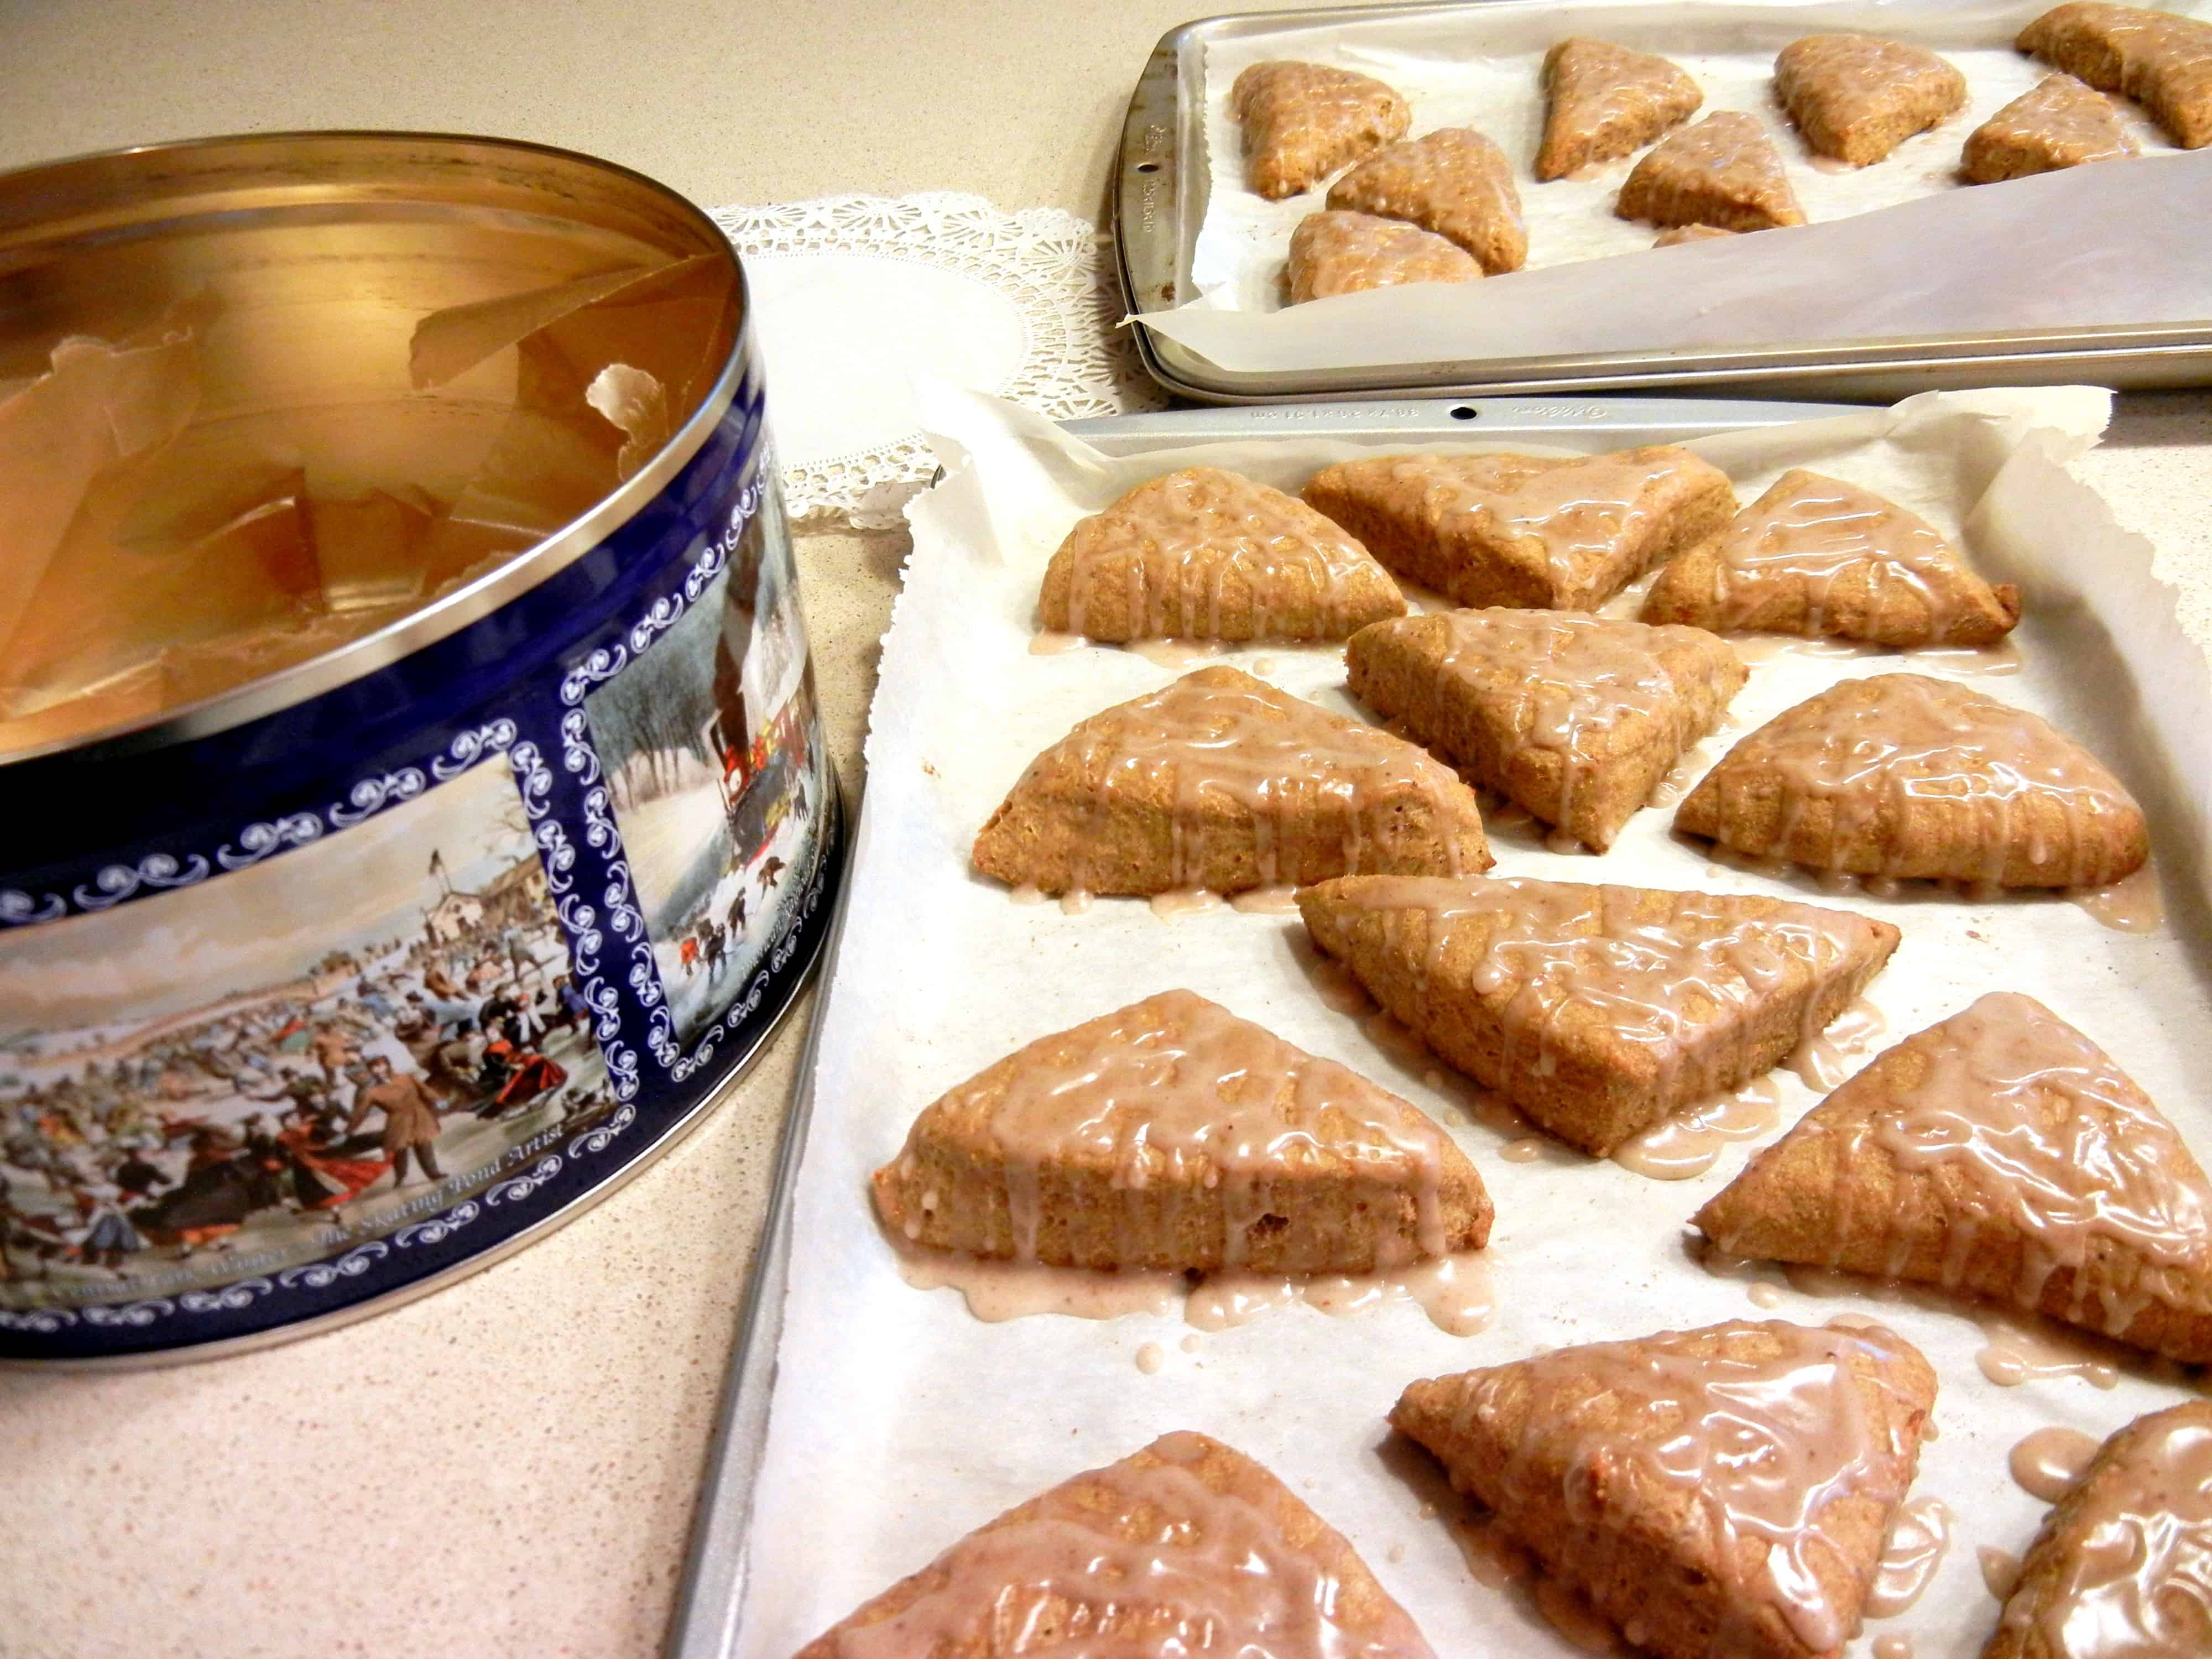 Better-Than-Starbuck's Pumpkin Scones Recipe and Tutorial. Baking trays full of warm baked scone with glaze puddles.